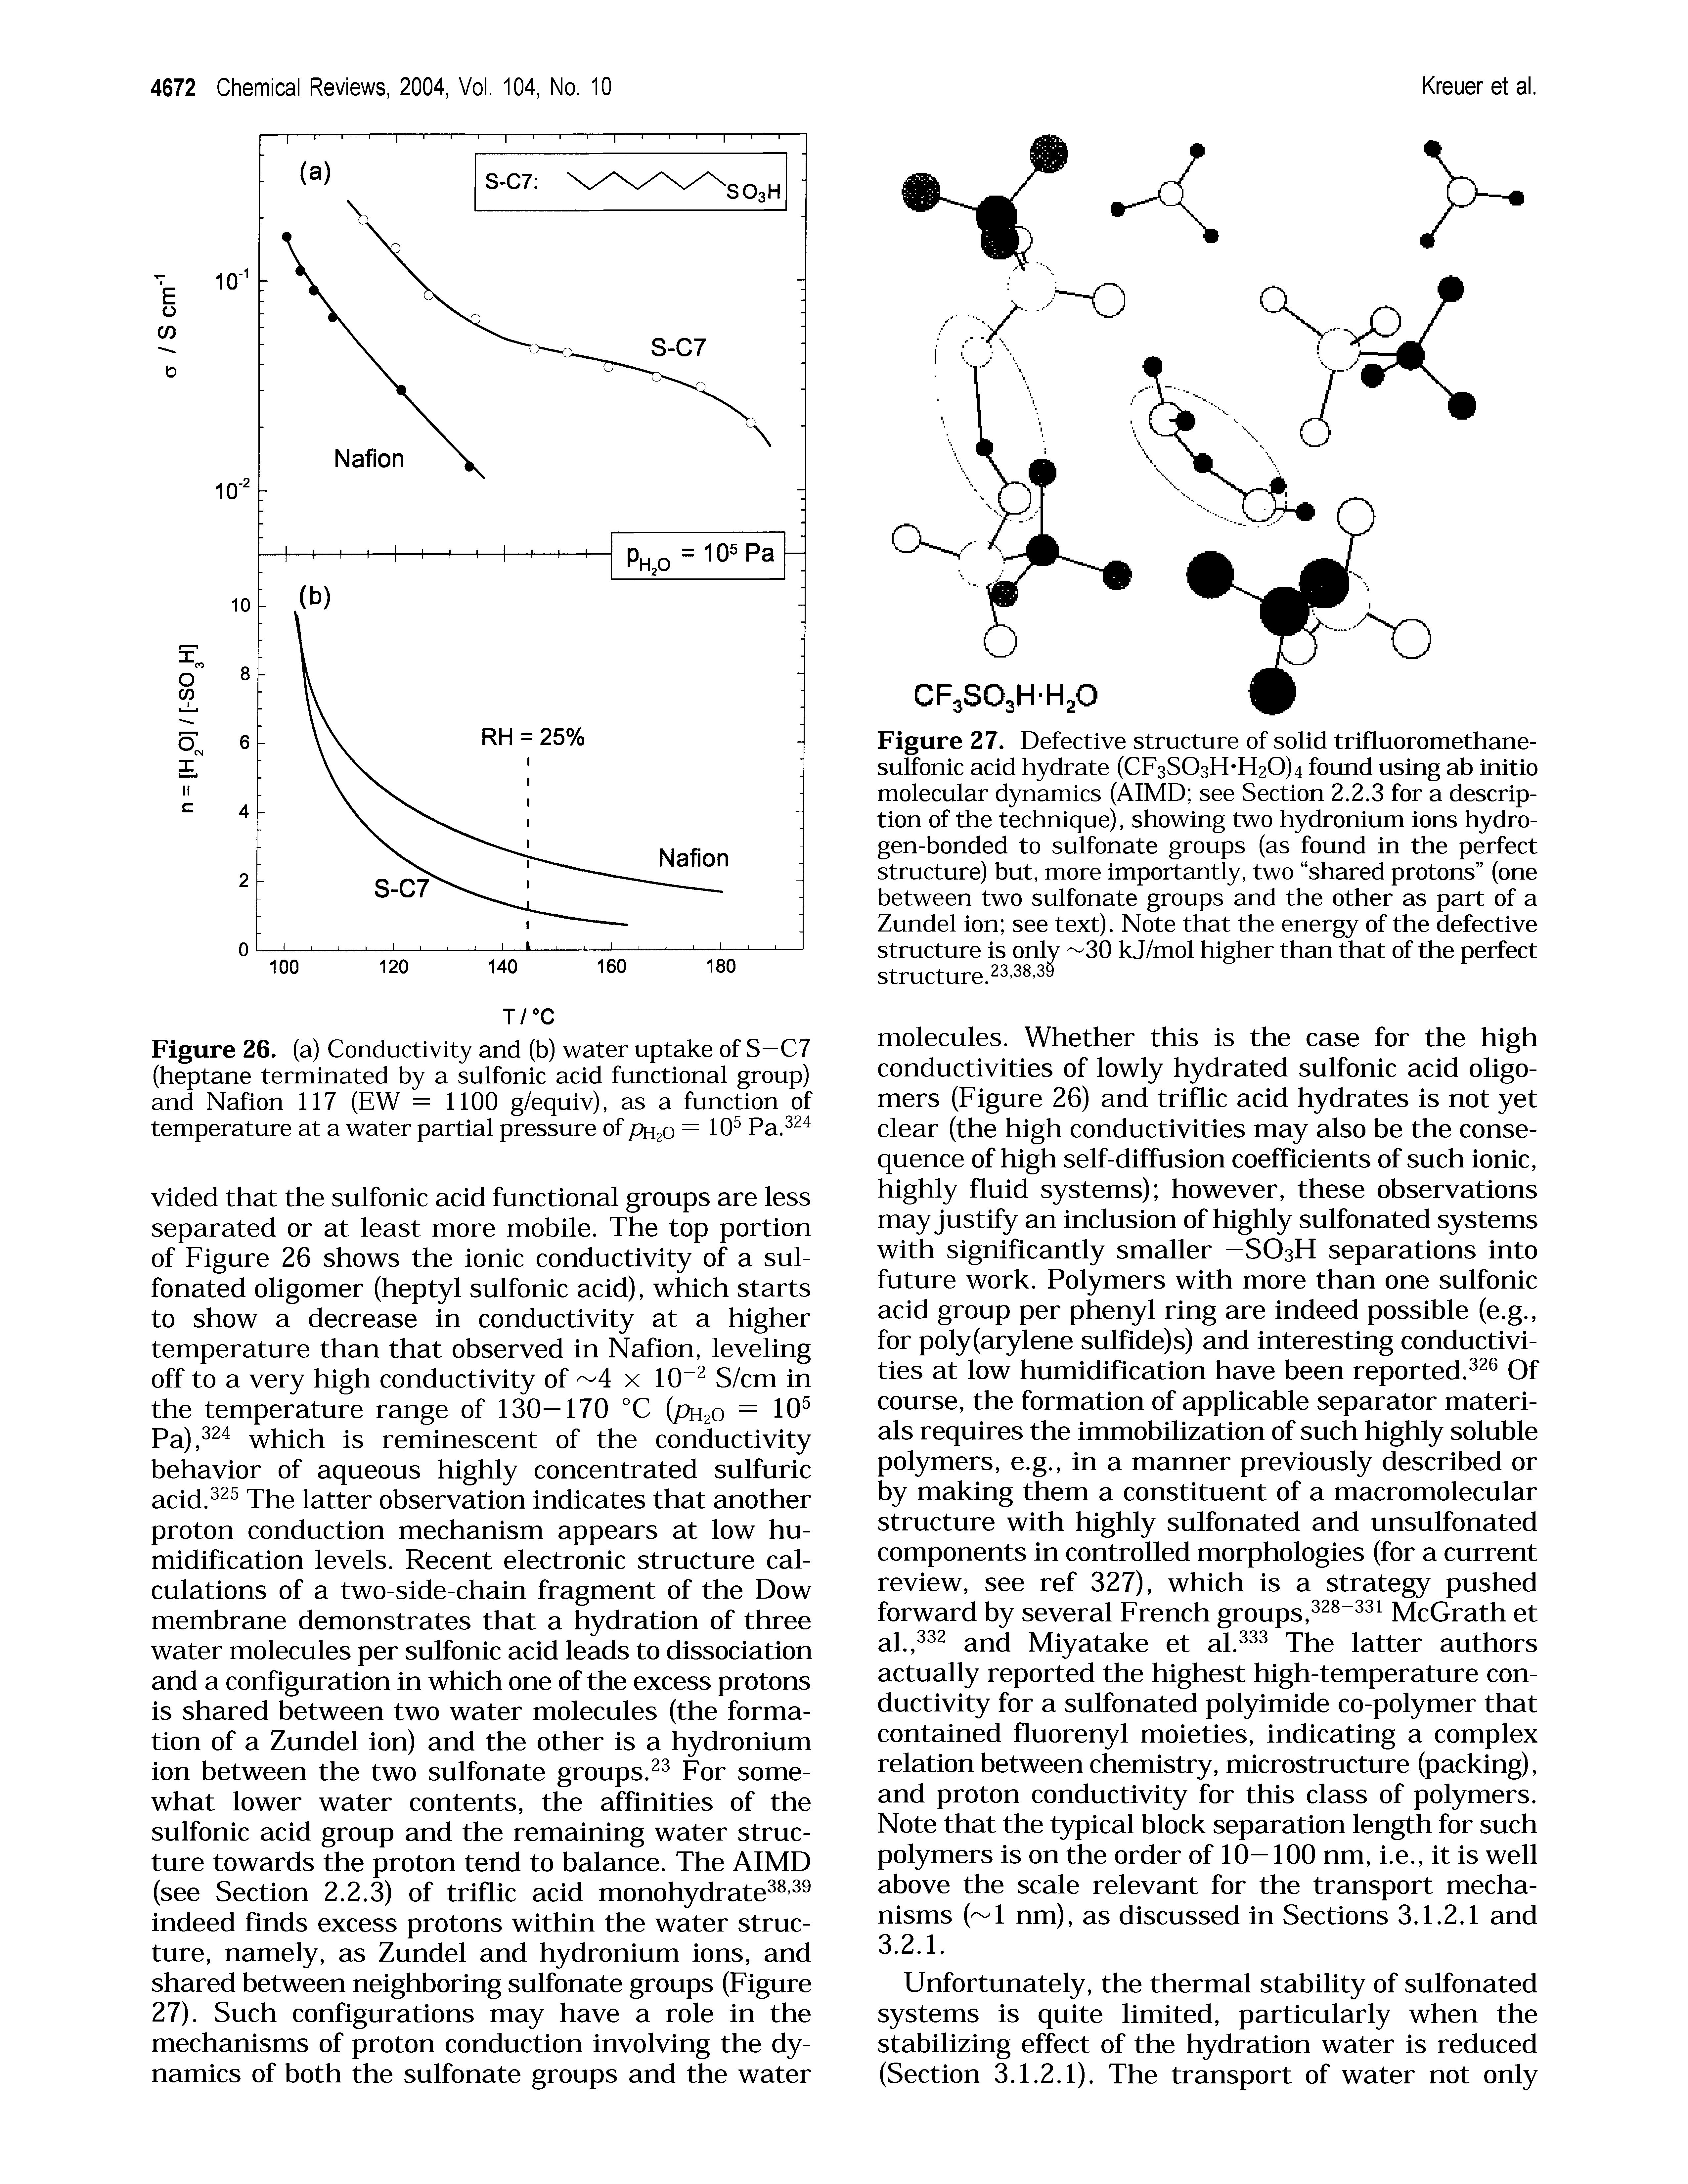 Figure 27. Defective structure of solid trifluoromethane-sulfonic acid hydrate (CF3S0sH H20)4 found using ab initio molecular dynamics (AIMD see Section 2.2.3 for a description of the technique), showing two hydronium ions hydro-gen-bonded to sulfonate groups (as found in the perfect structure) but, more importantly, two shared protons (one between two sulfonate groups and the other as part of a Zundel ion see text). Note that the energy of the defective structure is only --30 kj/mol higher than that of the perfect structure.